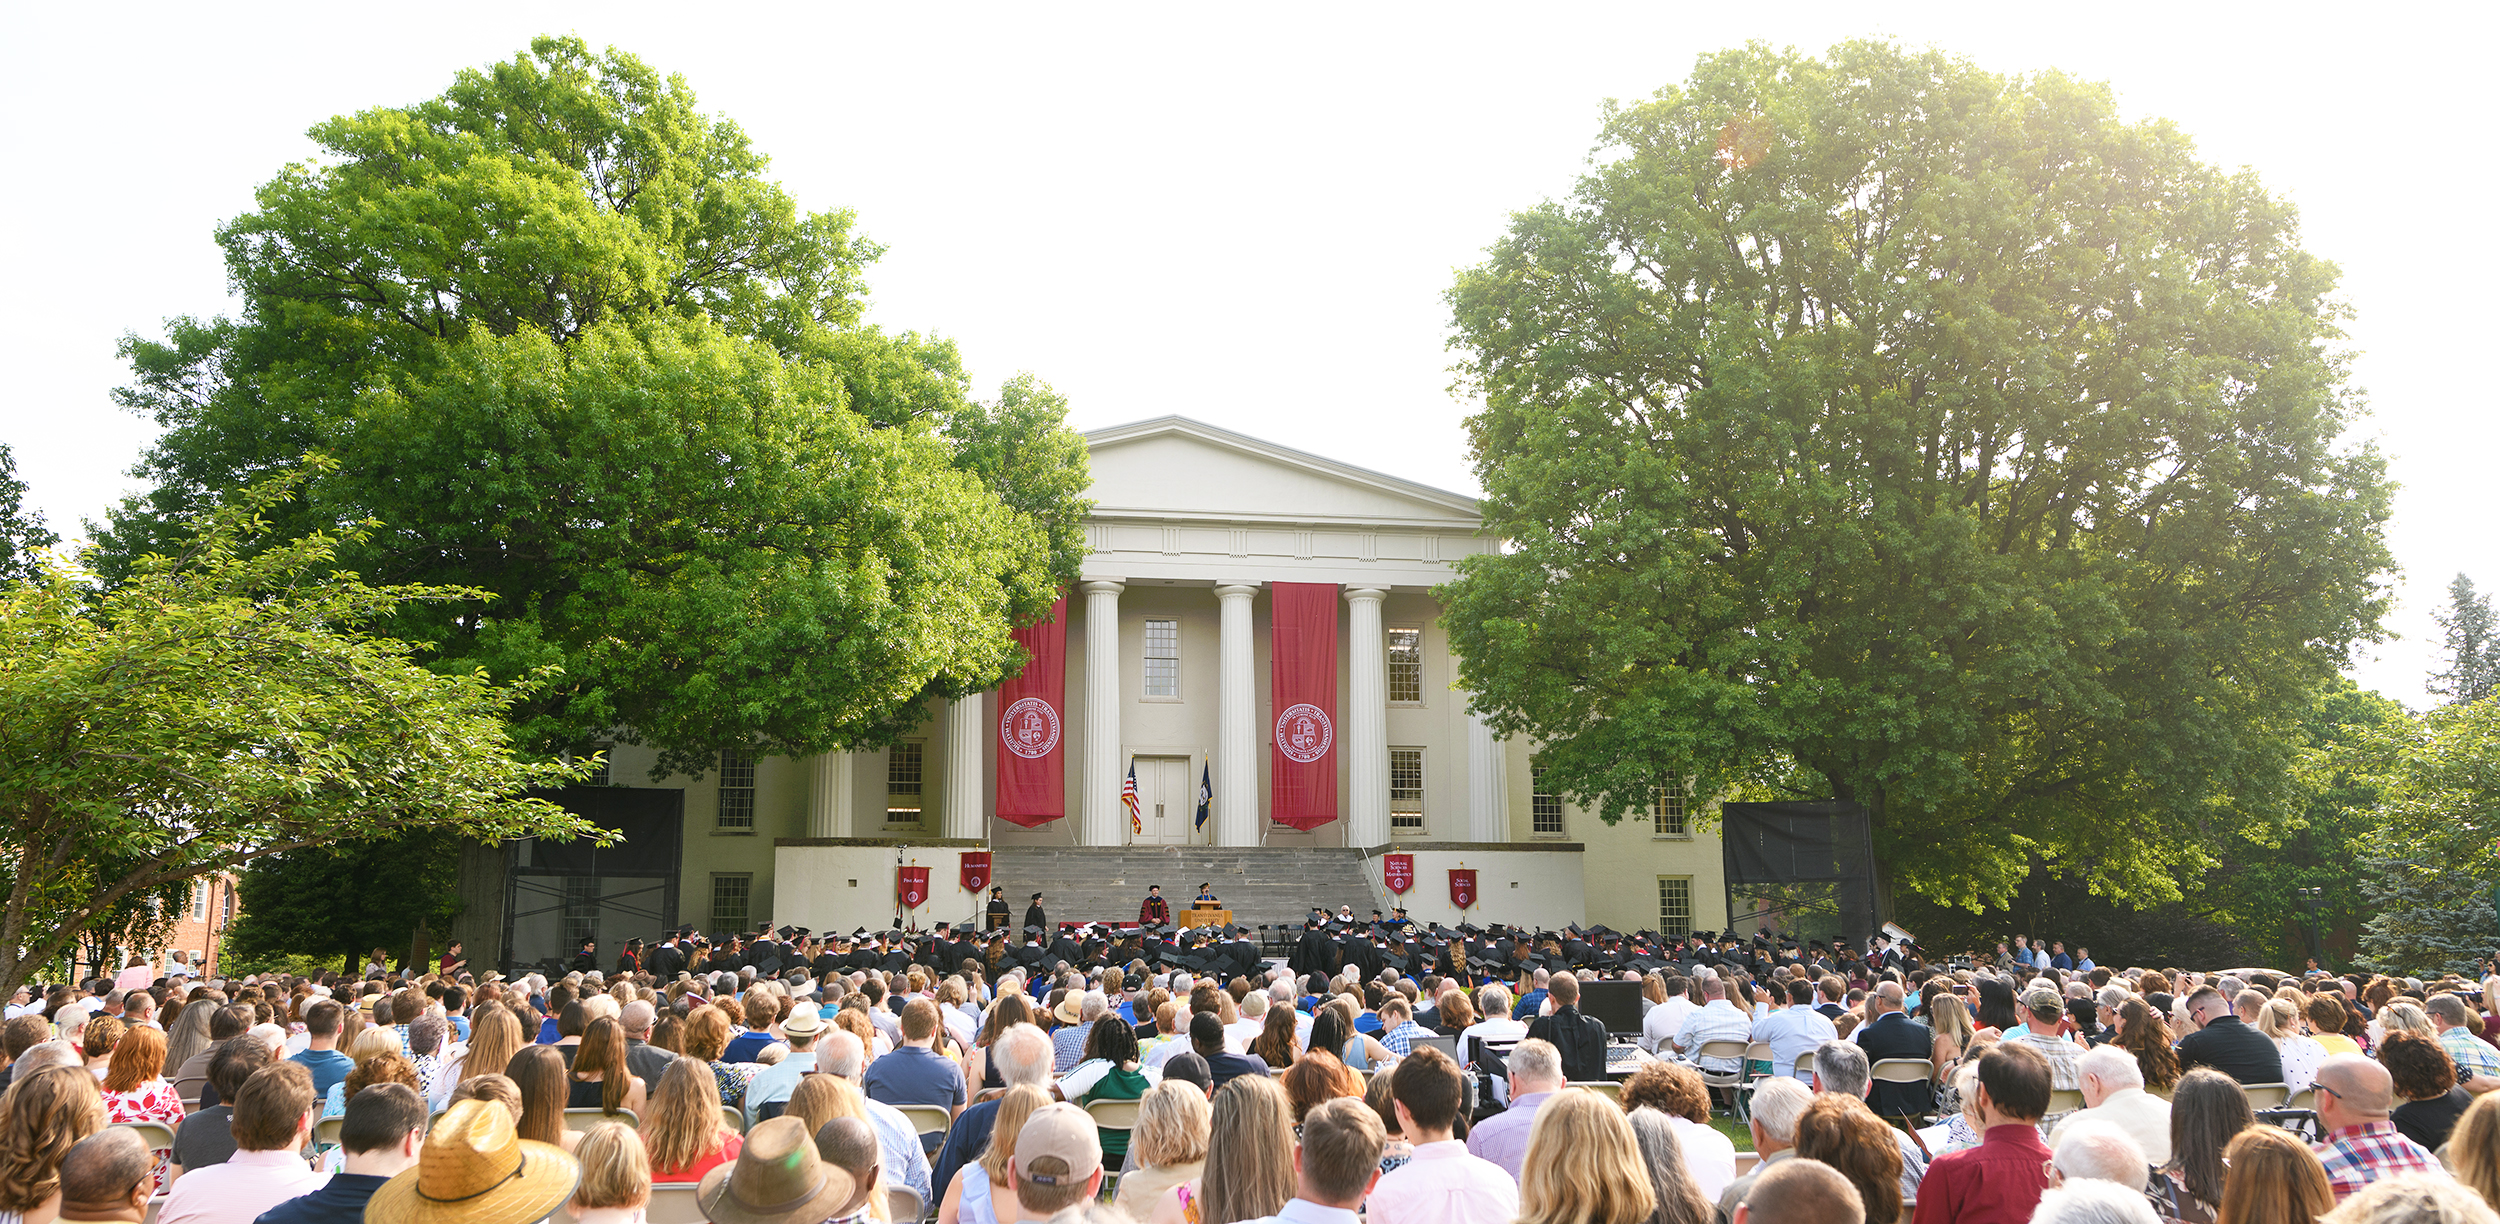 commencement audience in front of Old Morrison